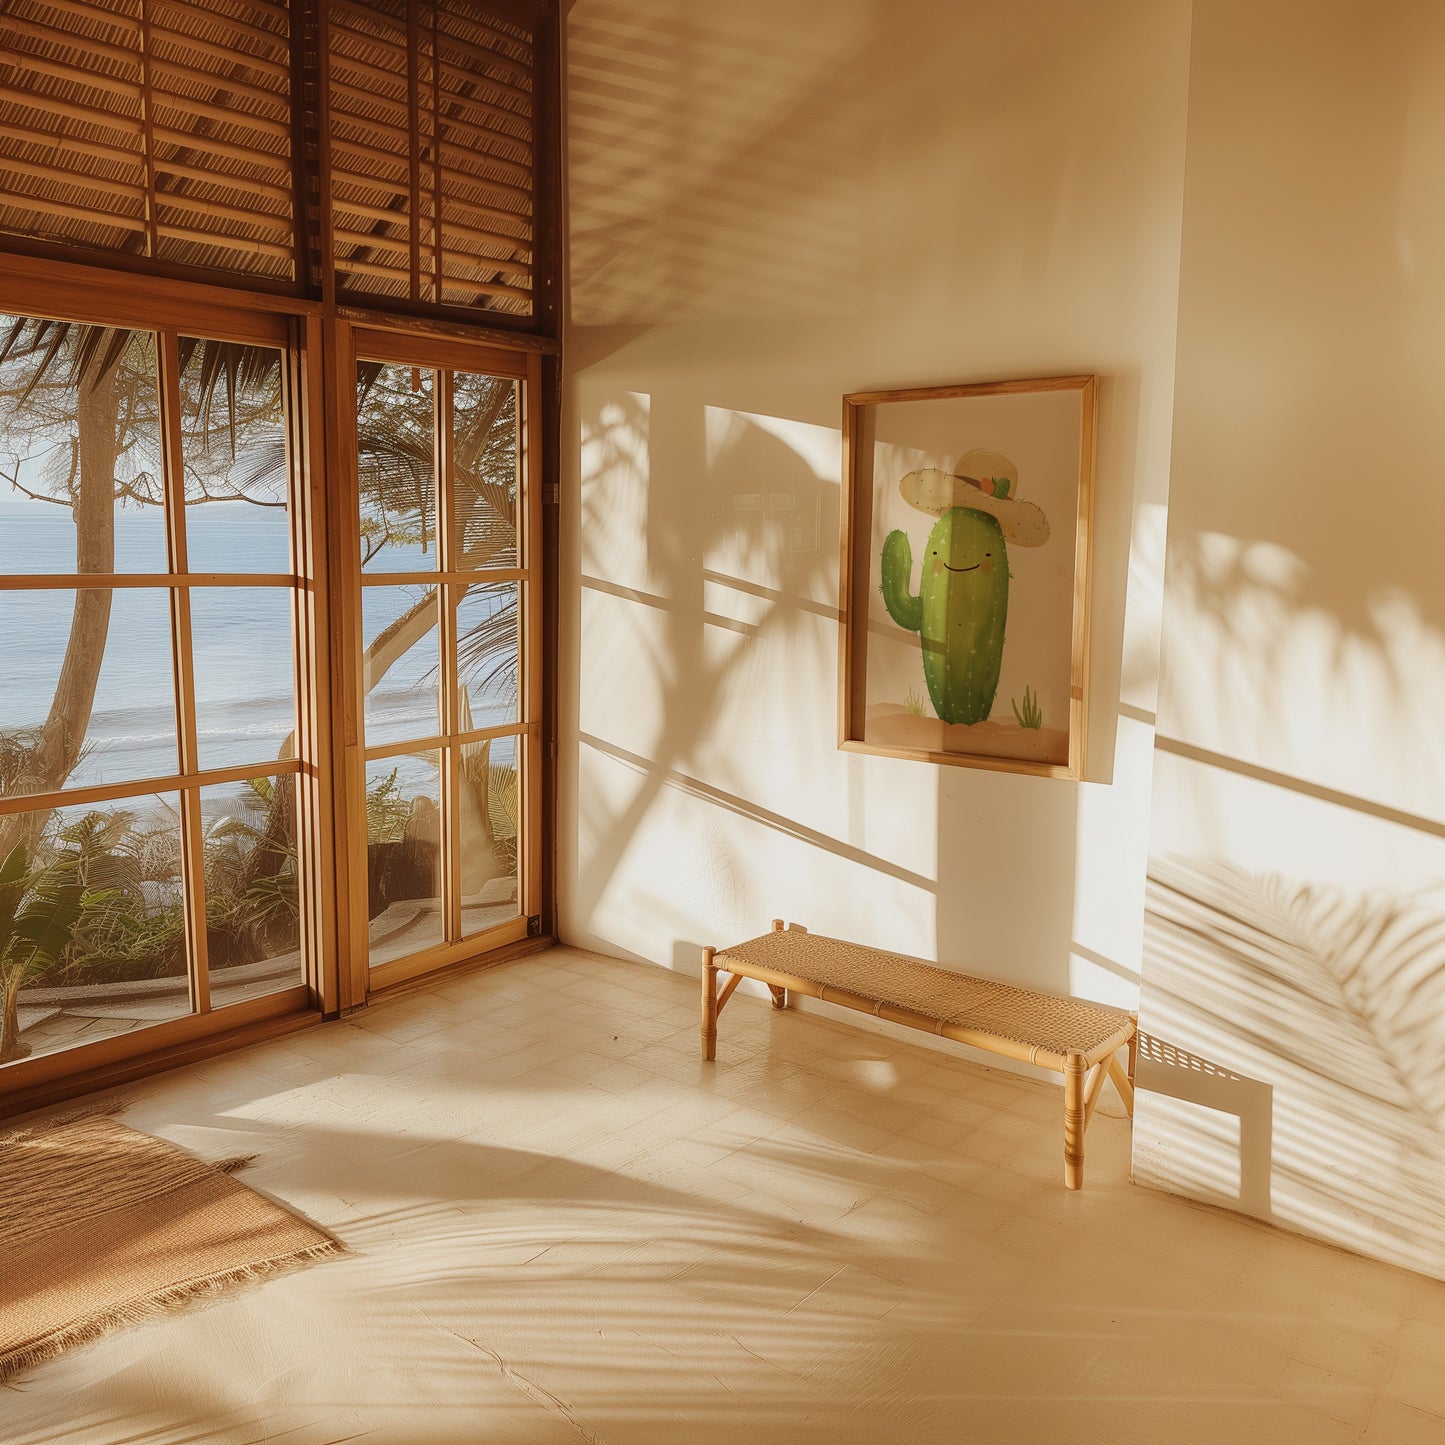 A bright, sunlit room with a cactus painting, large window overlooking the sea, and a wooden bench.